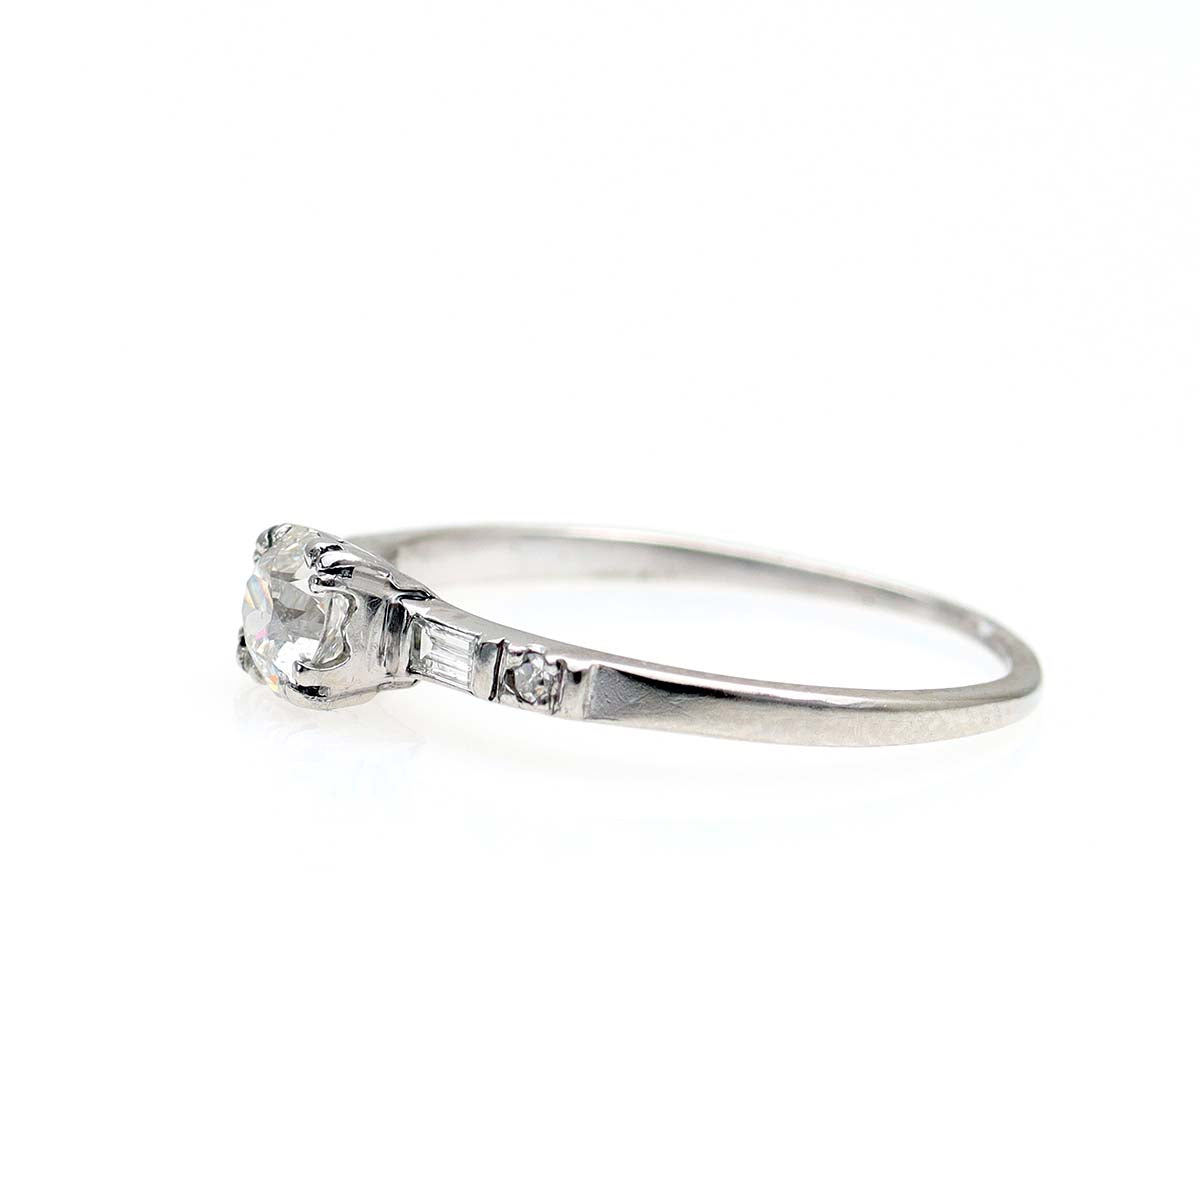 Late Art Deco Engagement Ring #VR220715-2